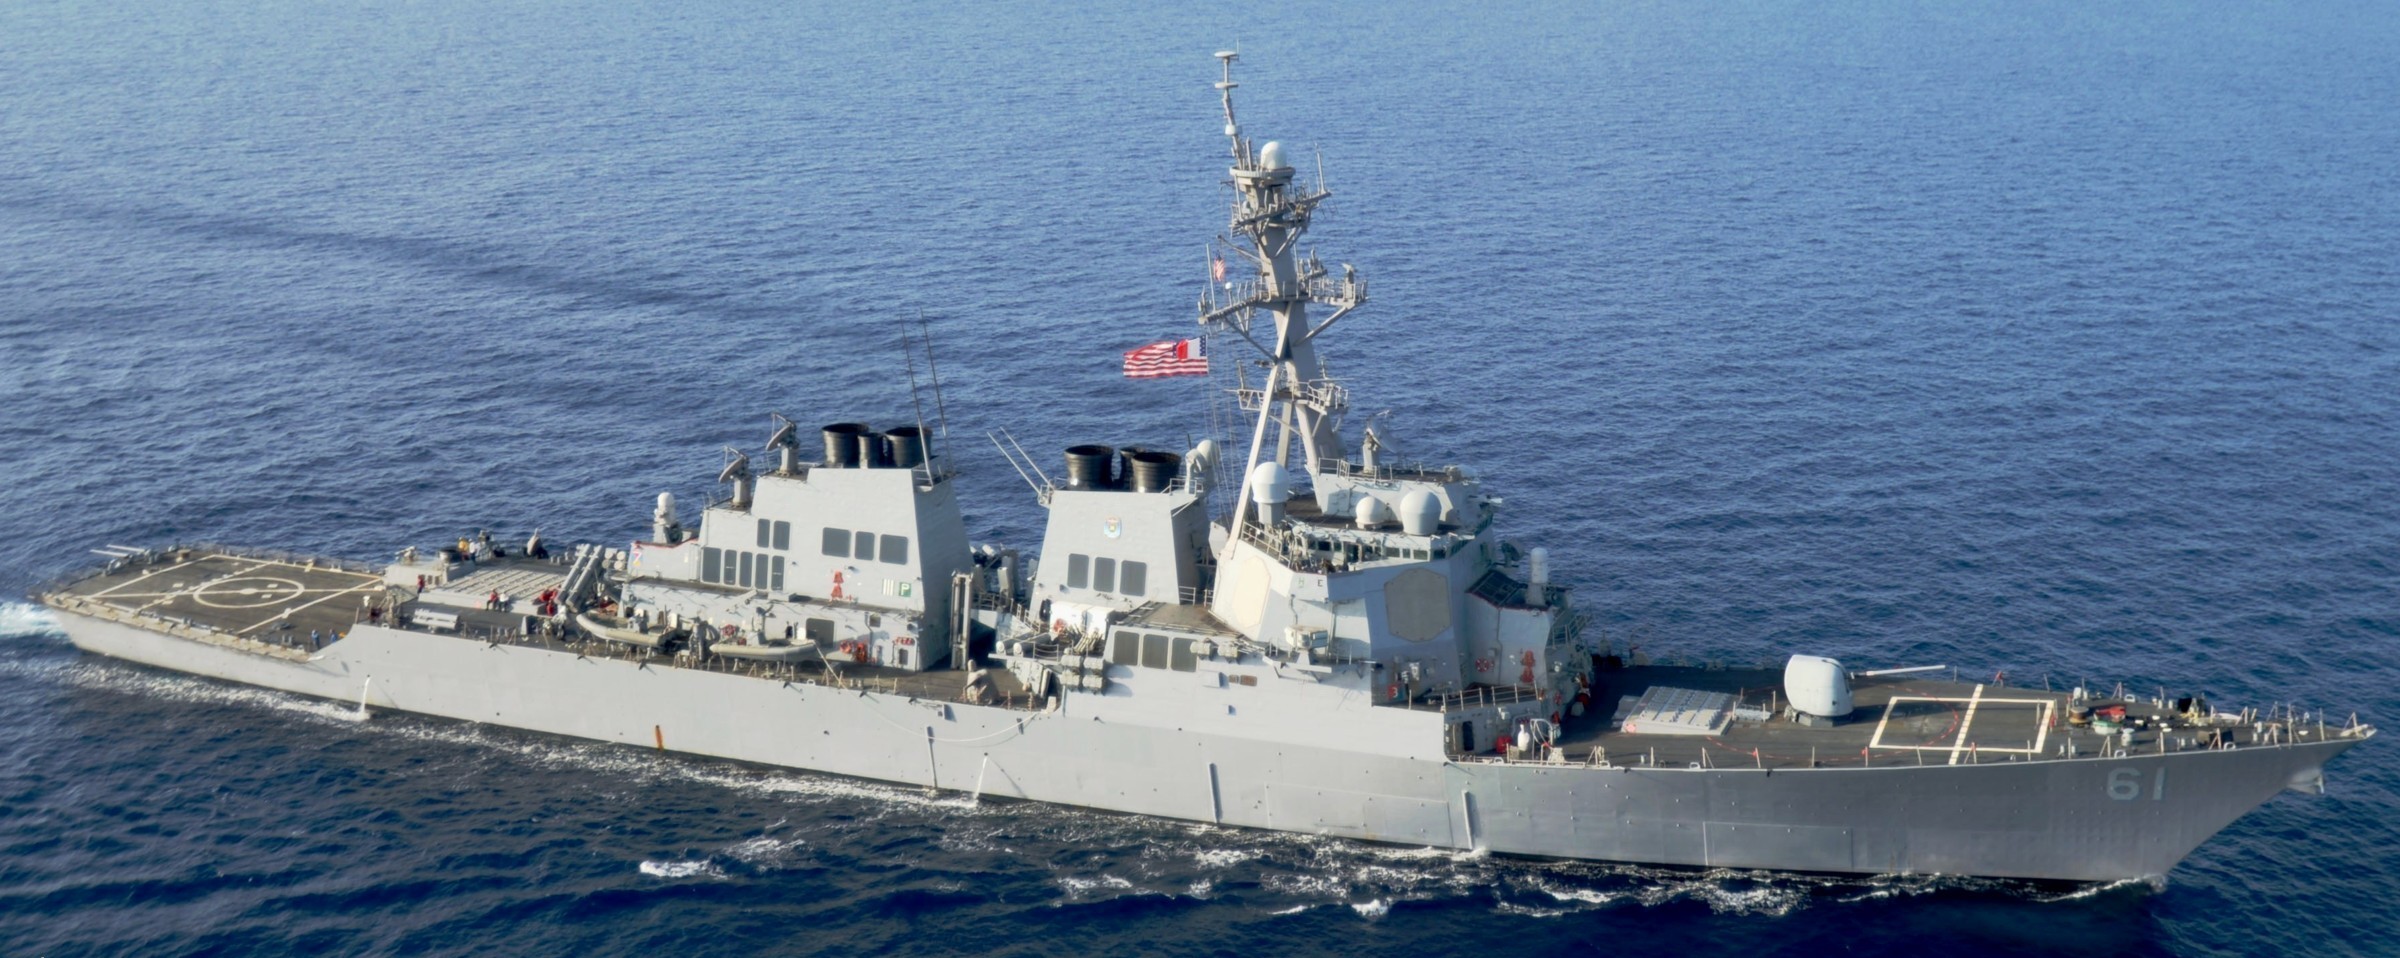 ddg-61 uss ramage guided missile destroyer arleigh burke class aegis us navy 86